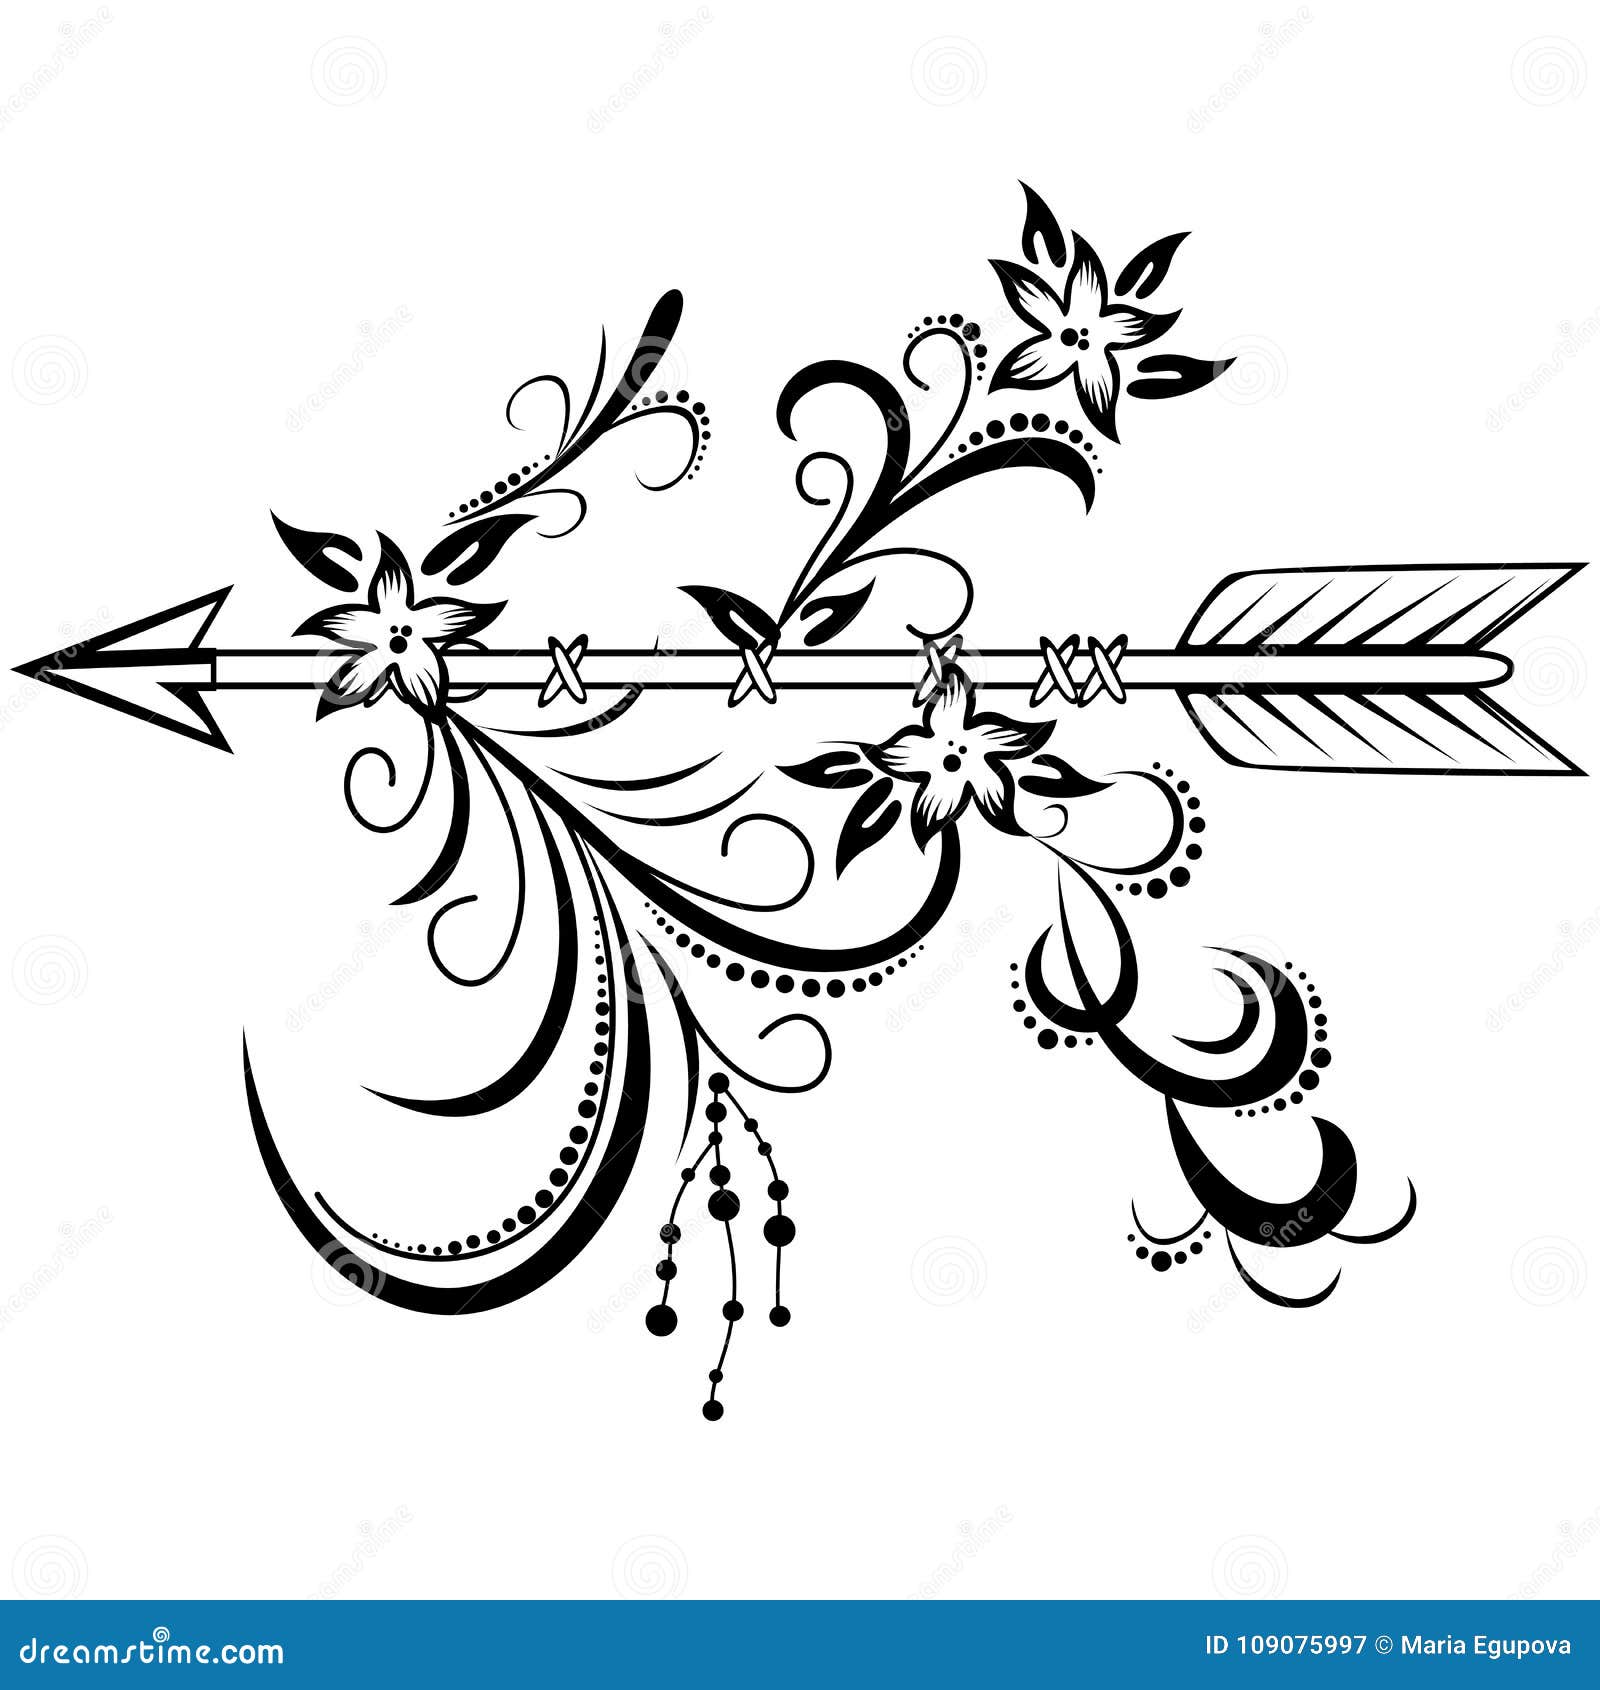 Download Wooden Arrow With Floral Ornament Stock Vector ...